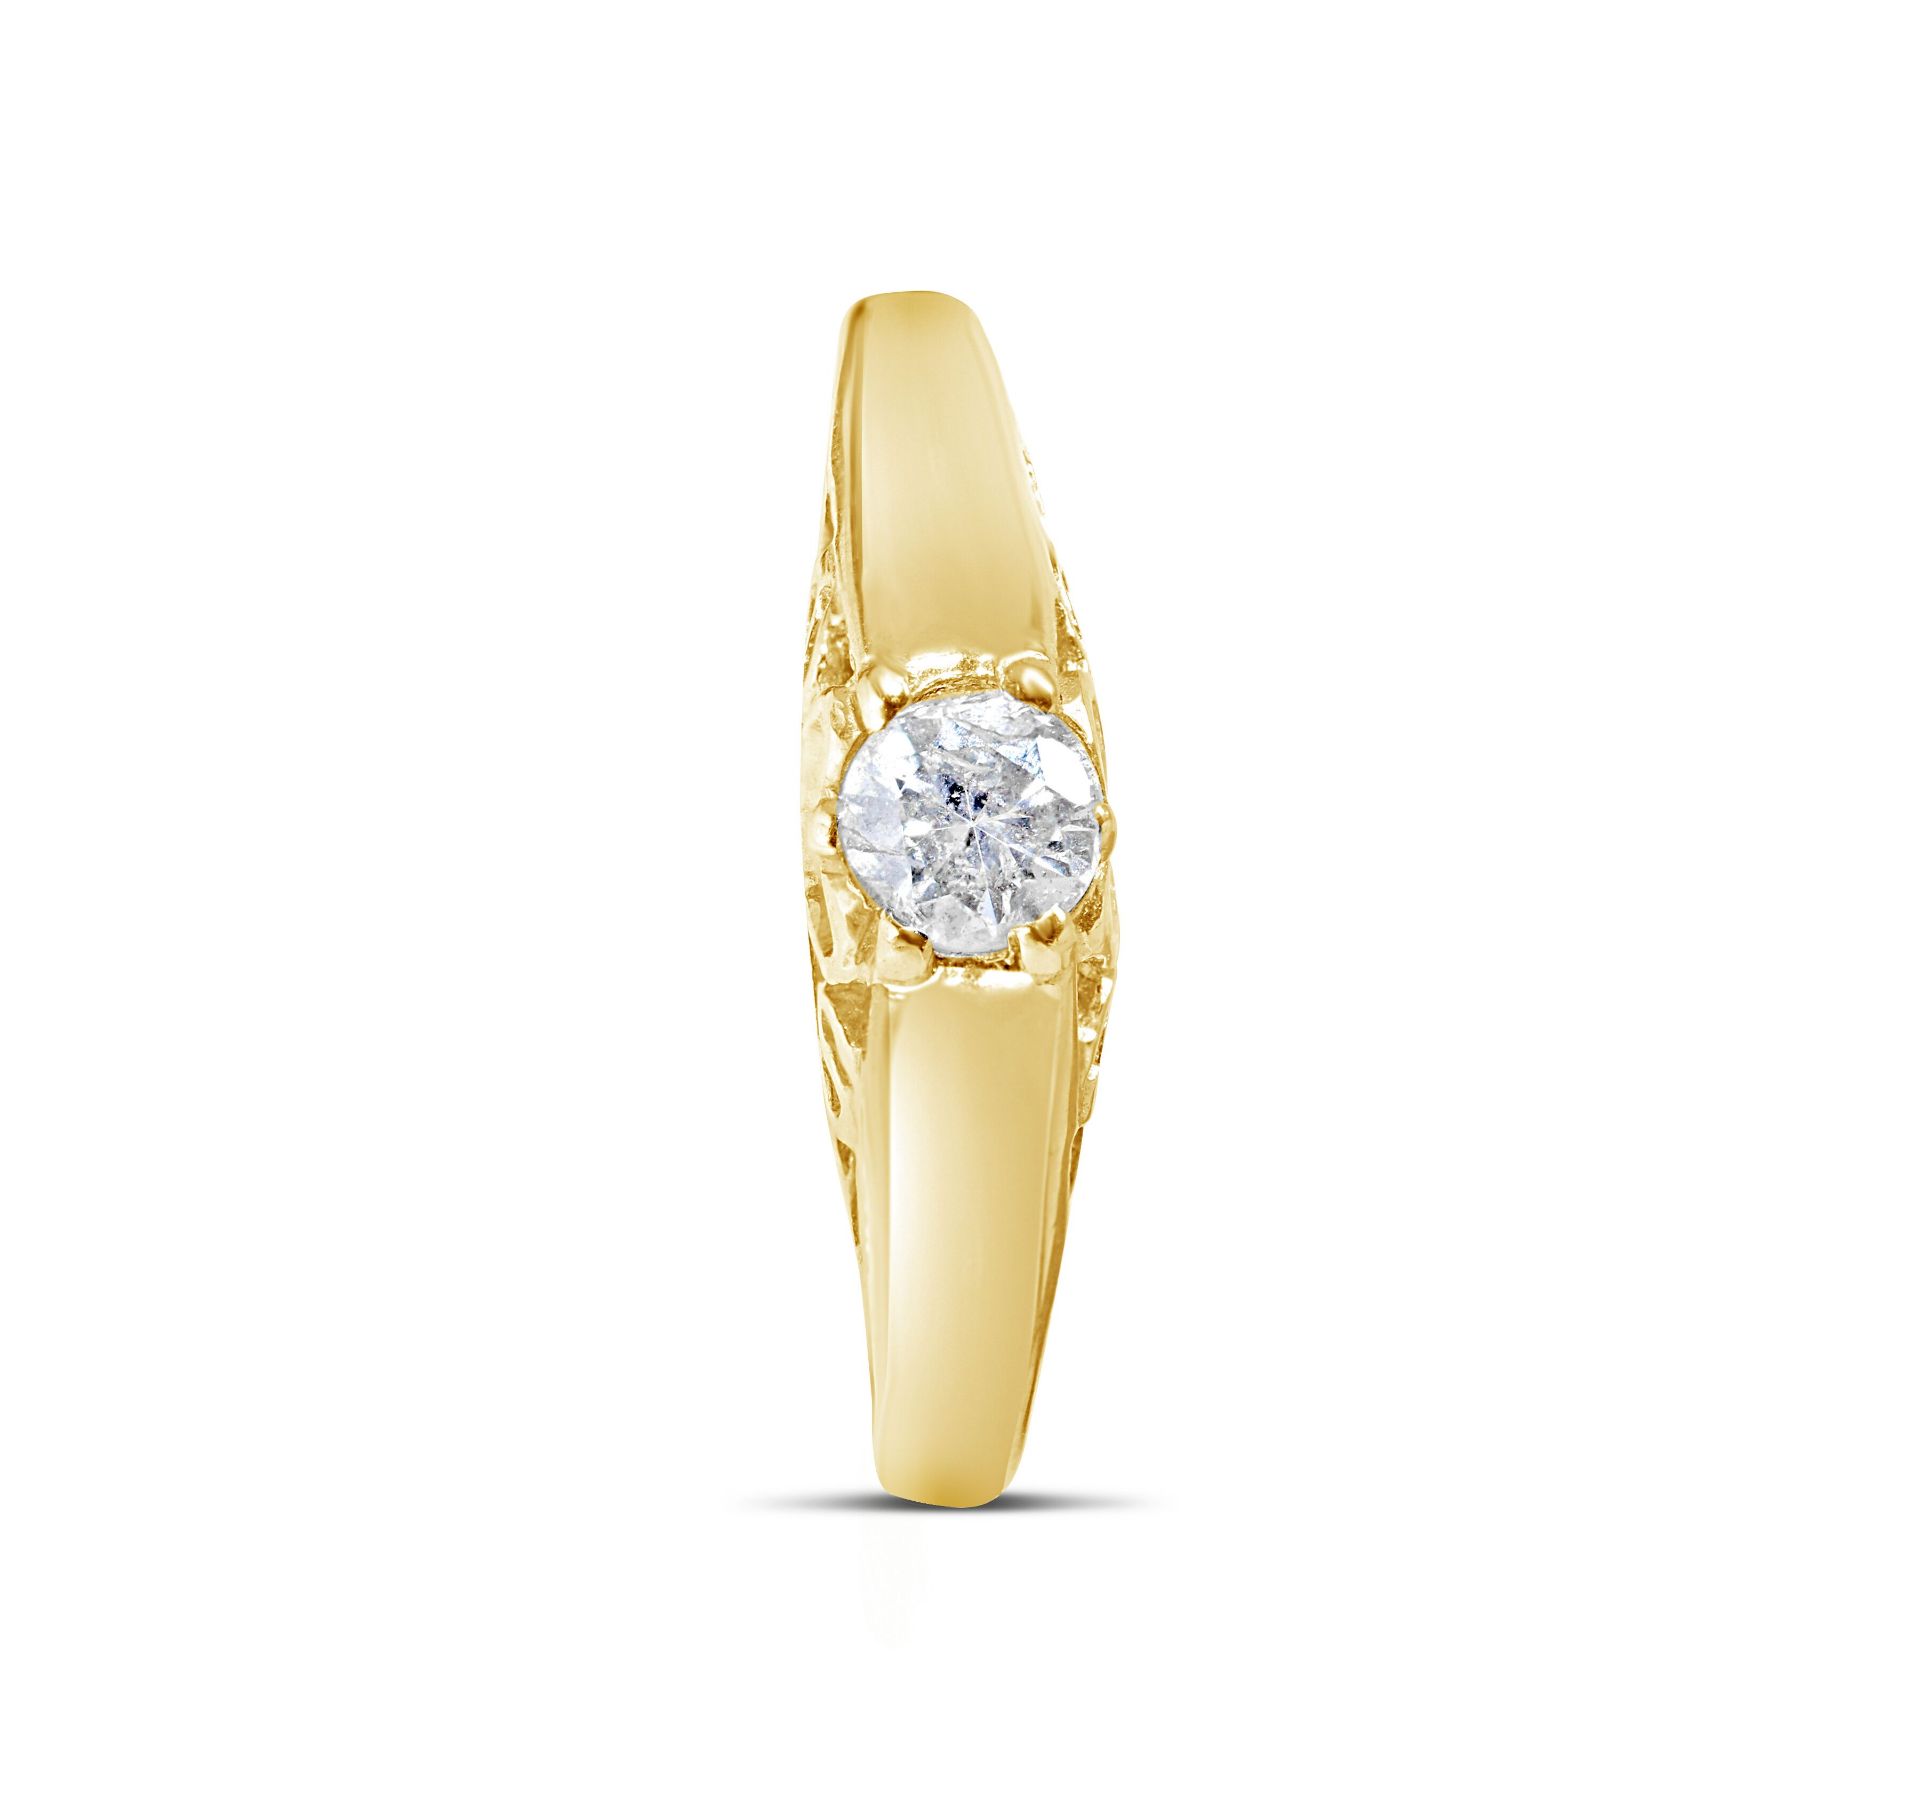 Diamond Ring, Metal 9ct Yellow Gold, Weight 1.56, Diamond Weight (ct) 0.16, Colour H, Clarity SI1-